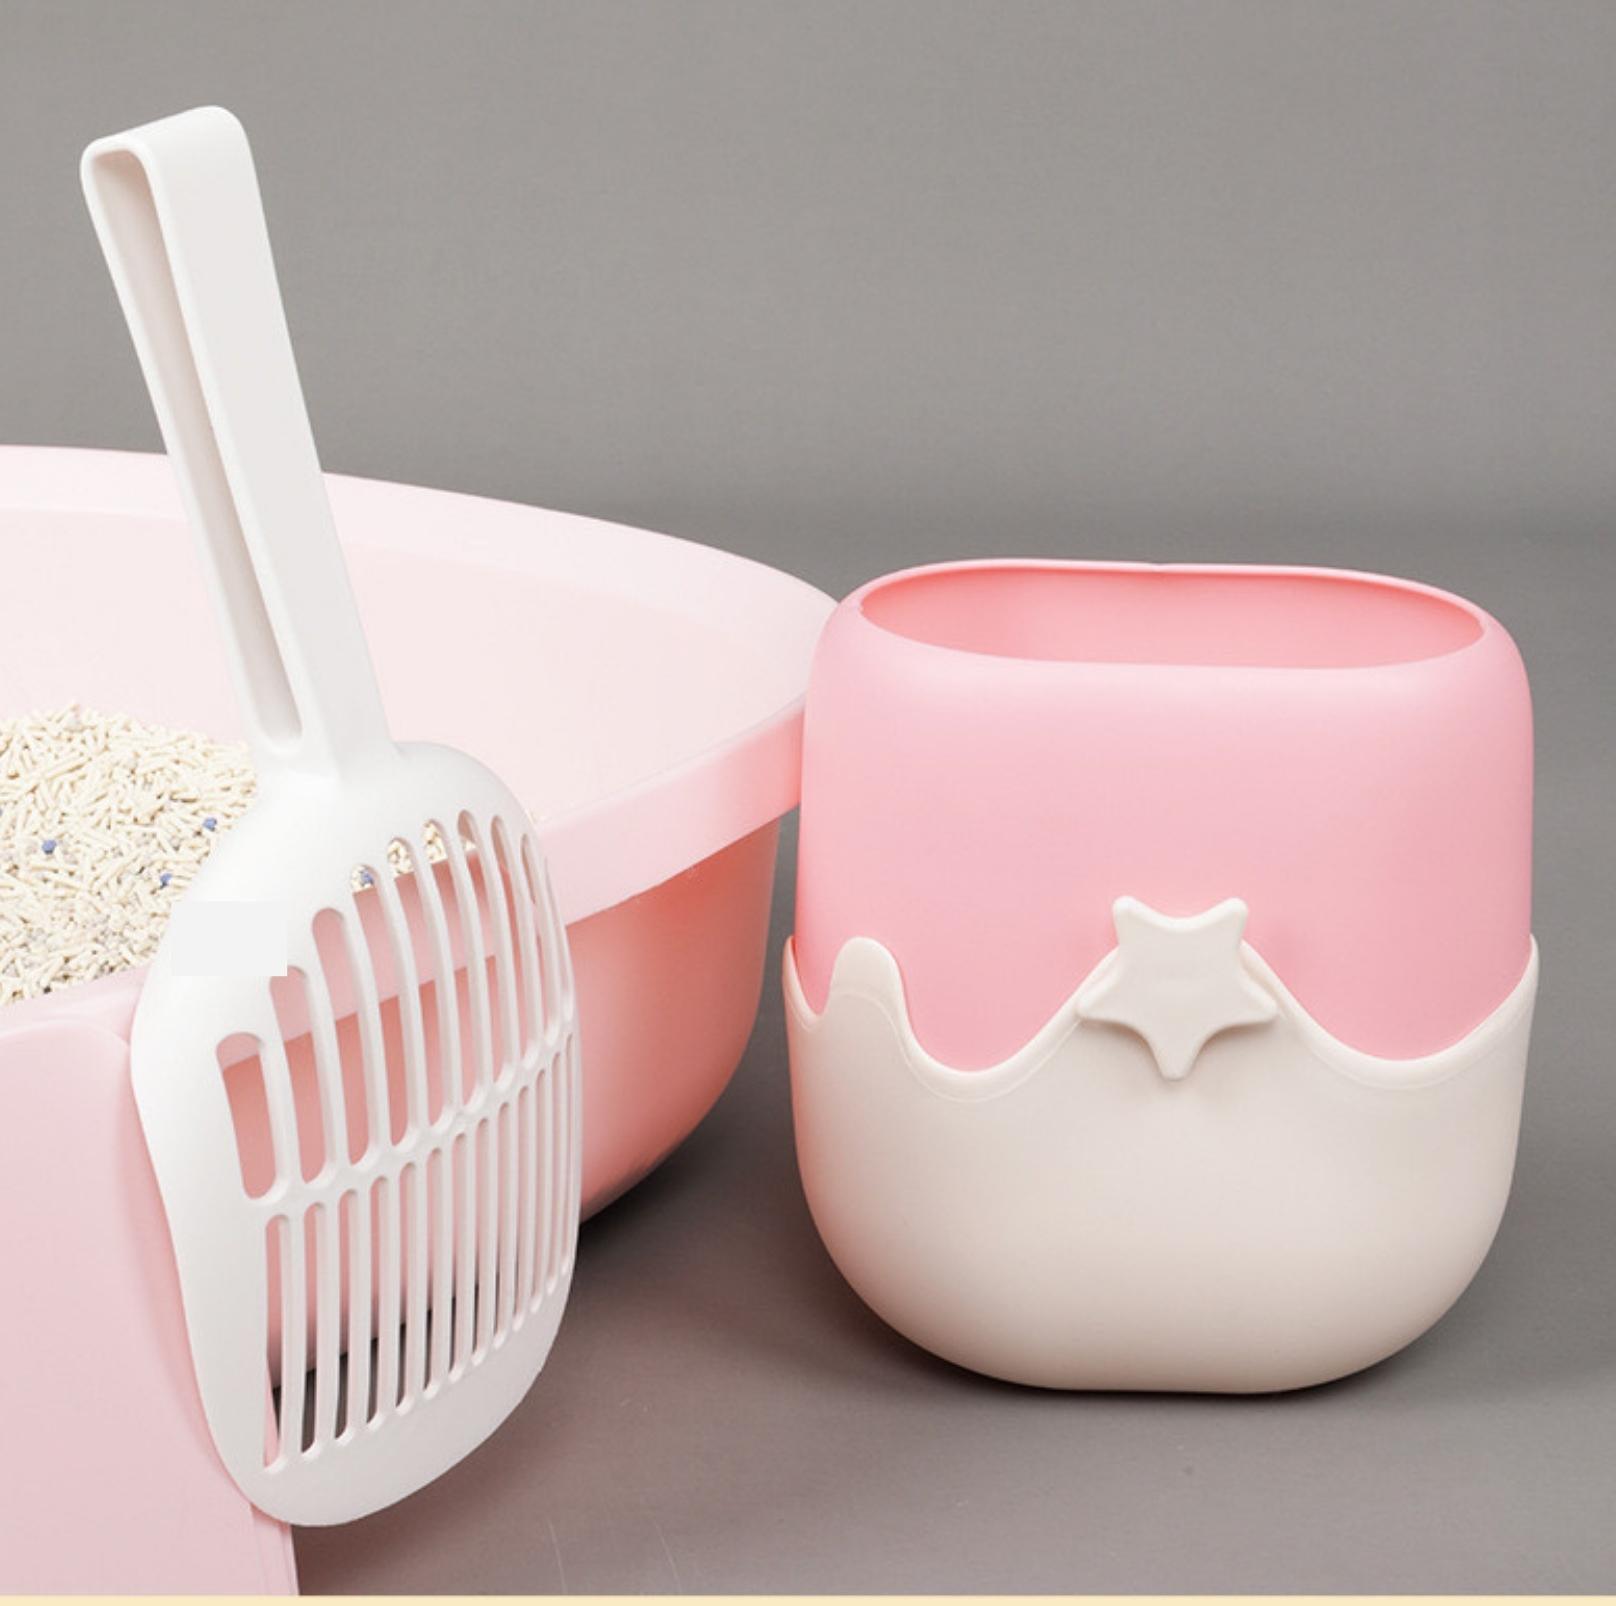 Tinypet Ice Cream Style Cat Litter Scoop Set with Holder - {{product.type}} - PawPawUp